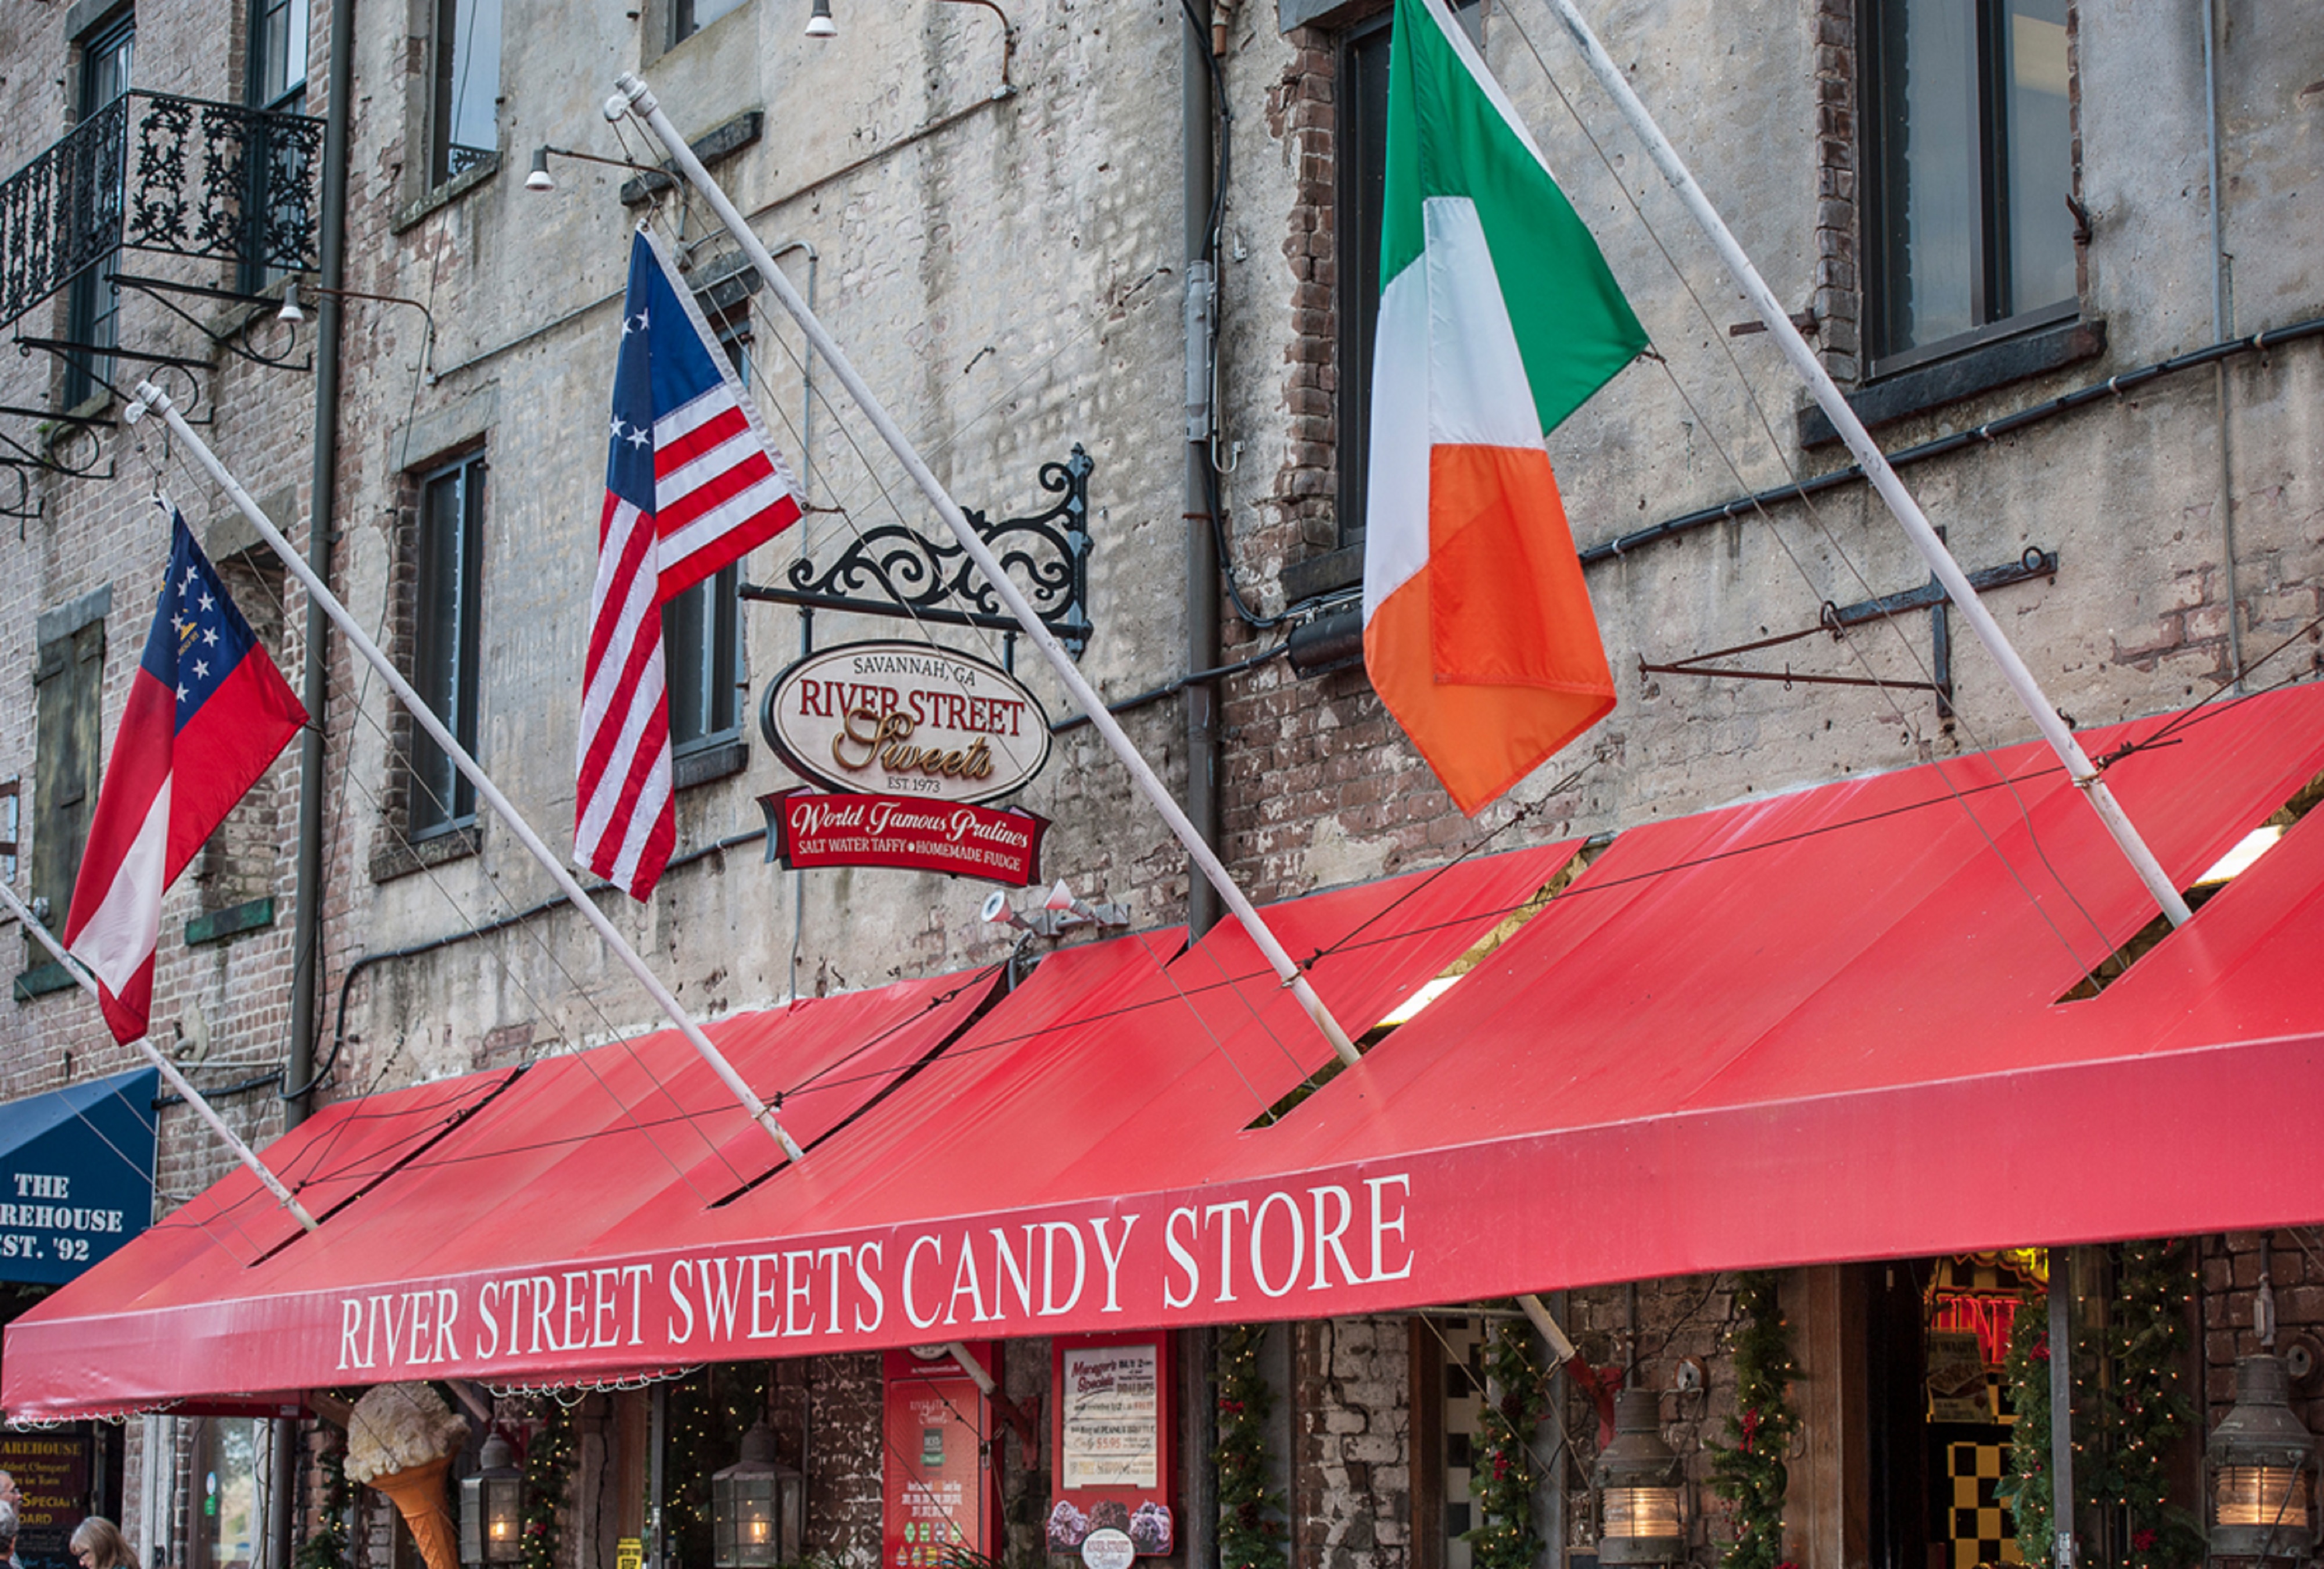 River Street Sweets Candy Store